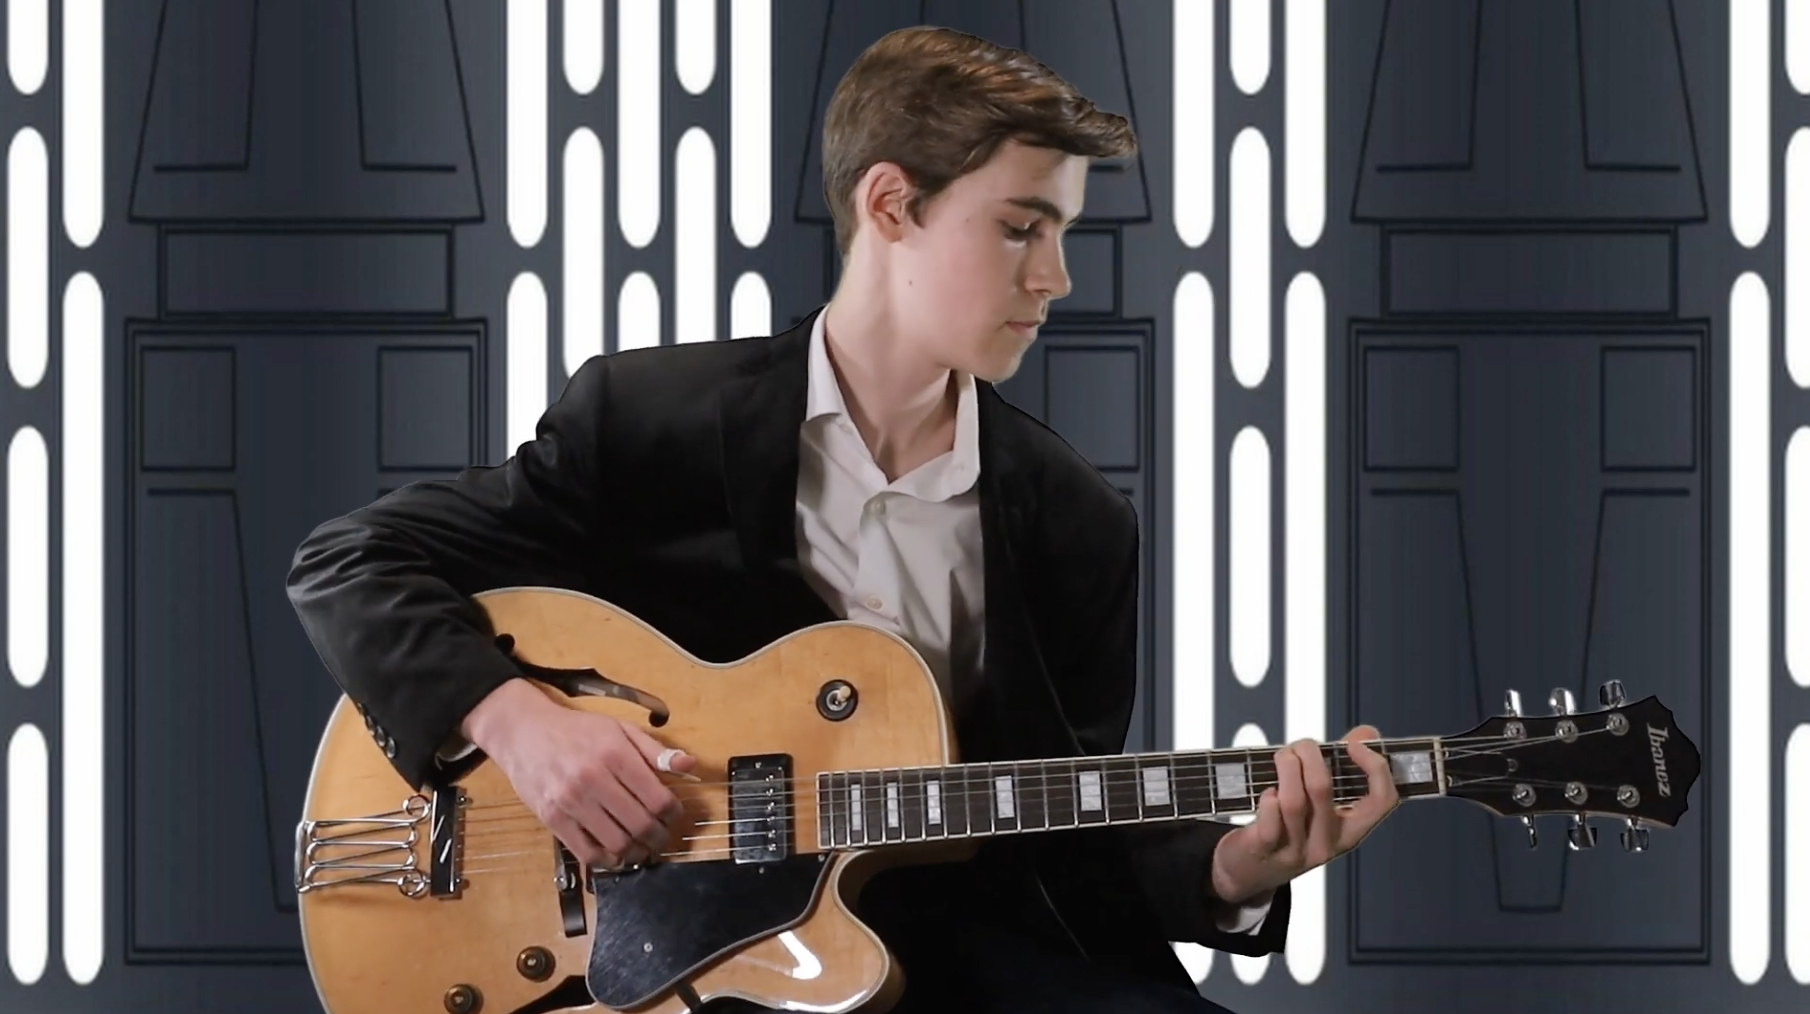 During the WTMA Talent Show 2023, Lawrence Wunderlich played his guitar with a star wars themed background.